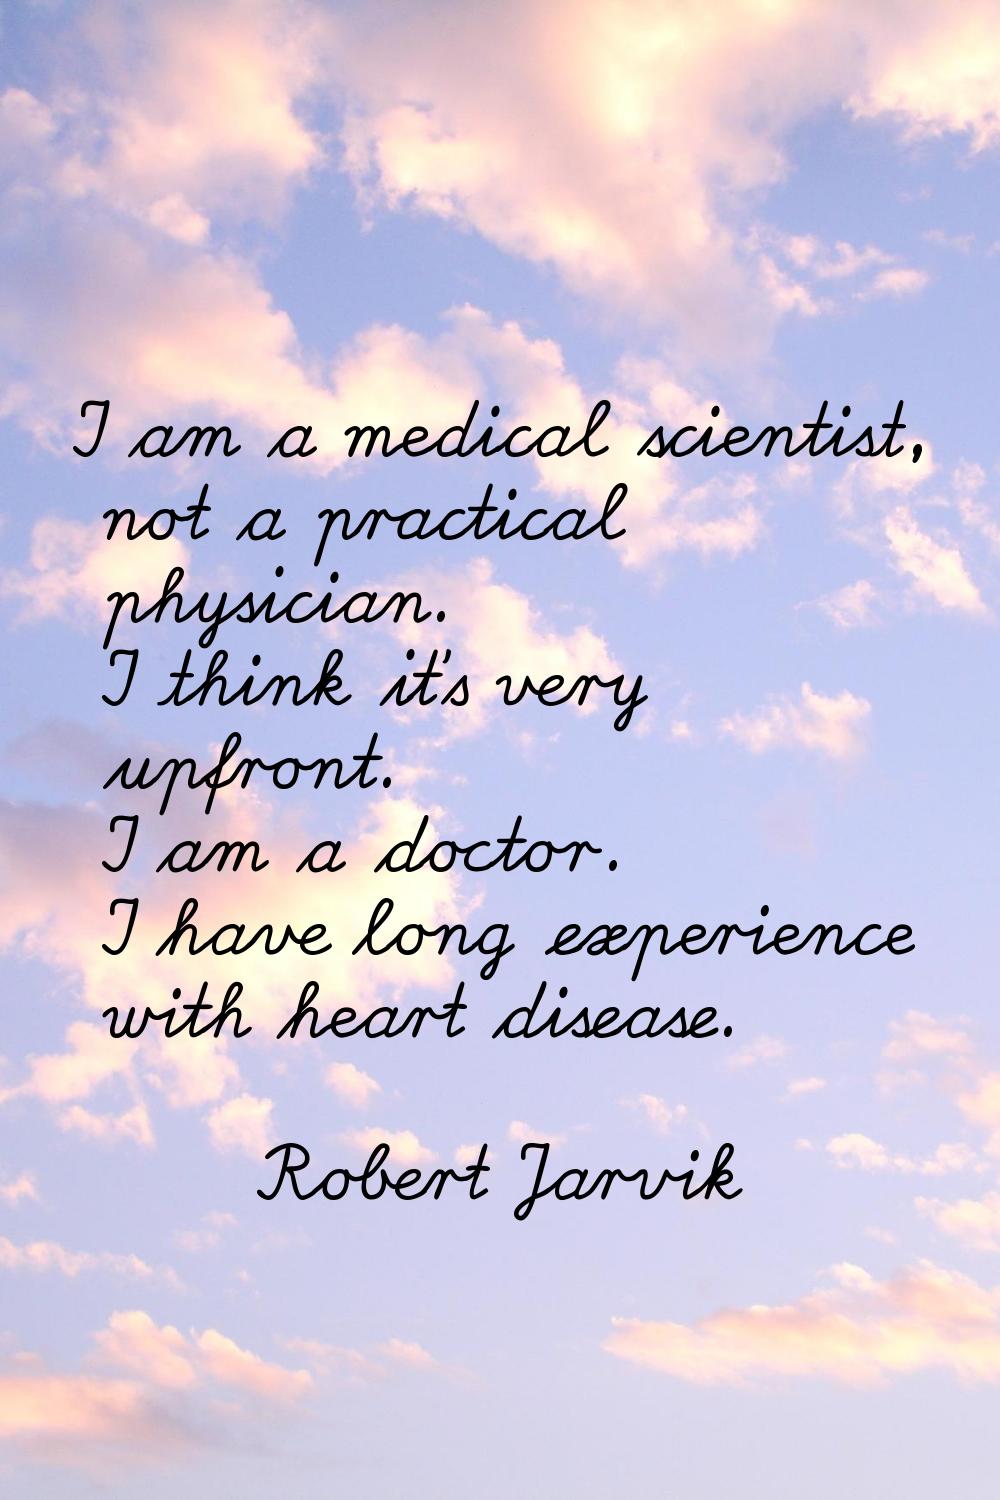 I am a medical scientist, not a practical physician. I think it's very upfront. I am a doctor. I ha